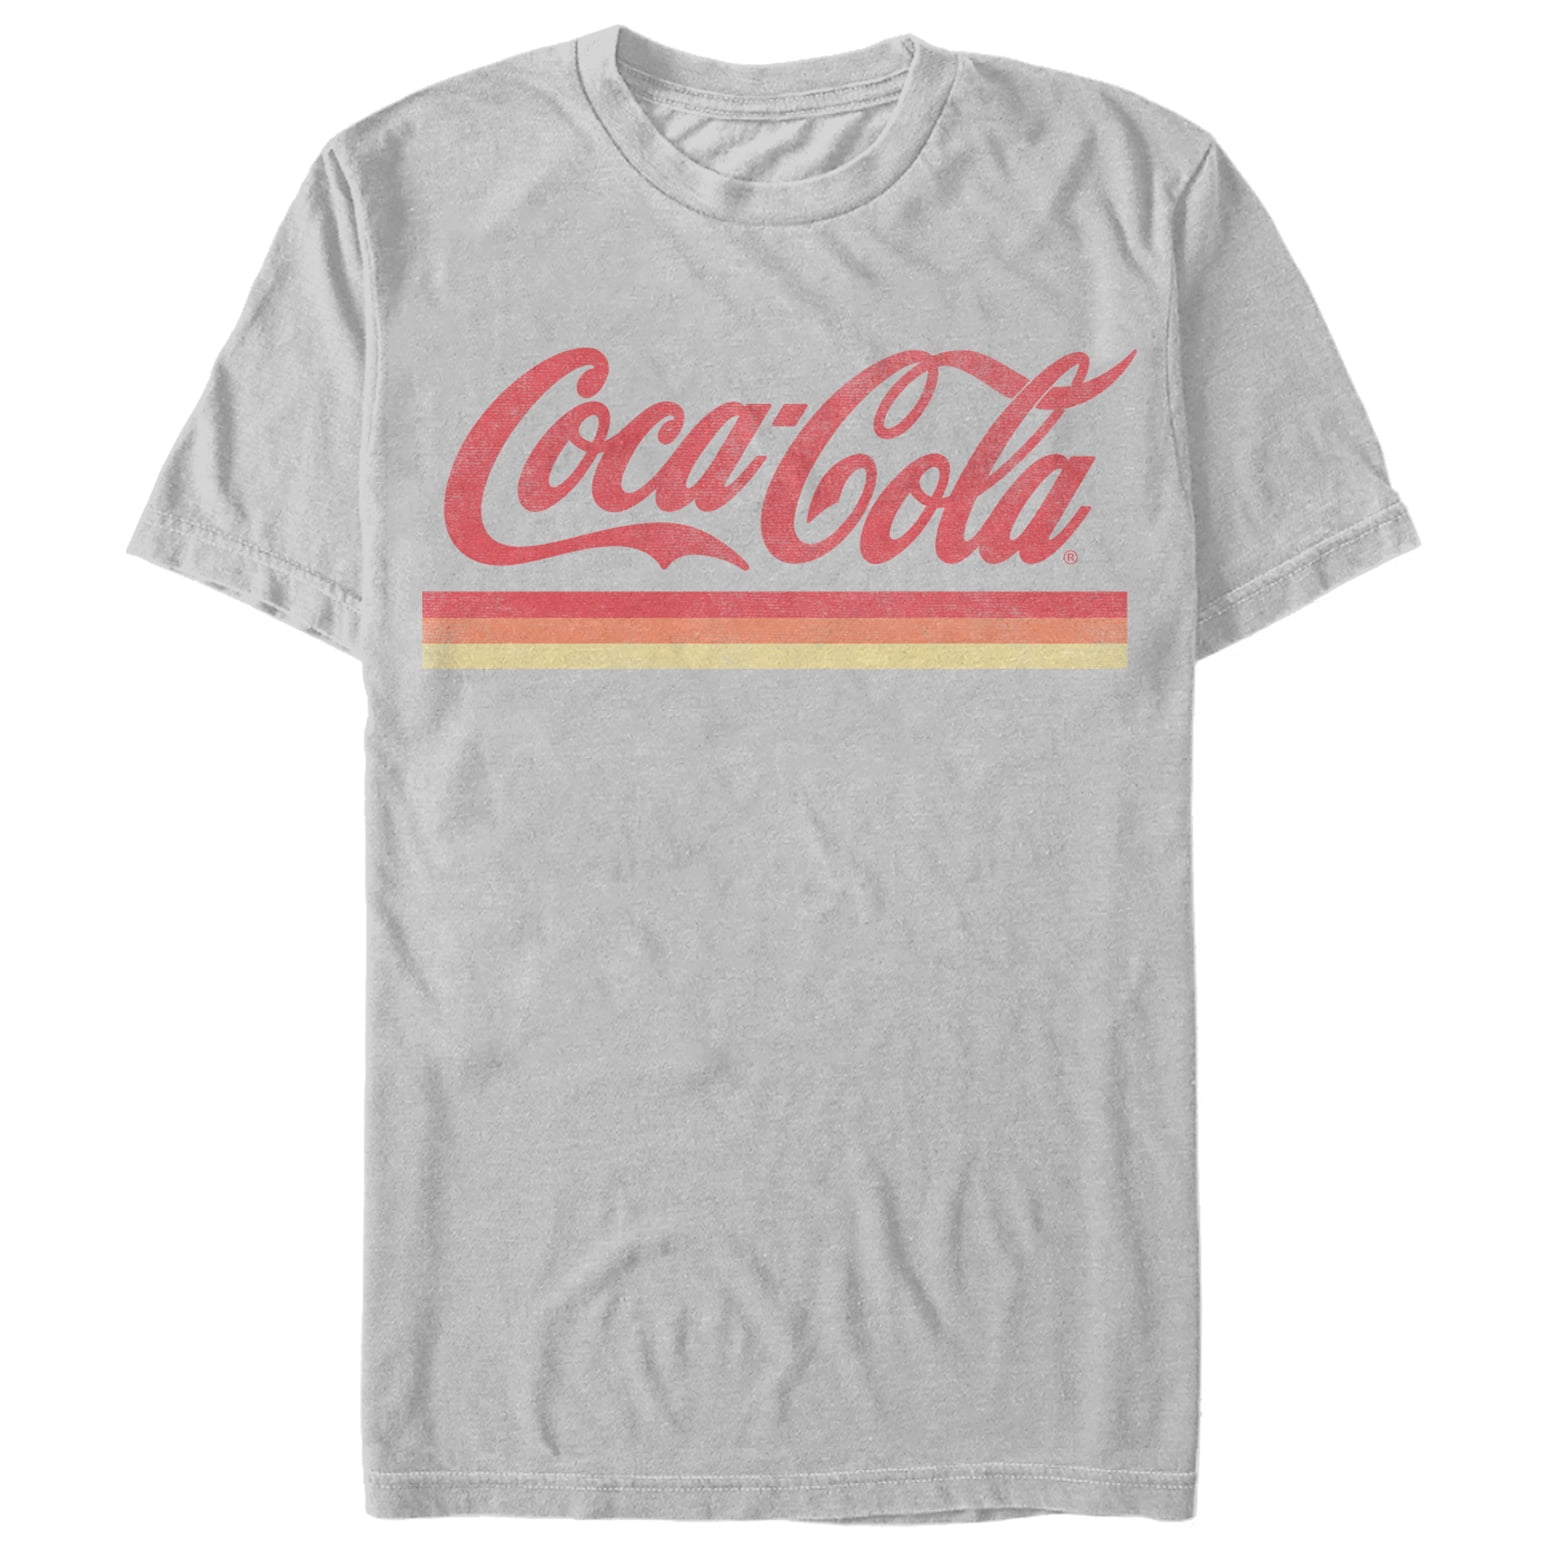 Coca-Cola Red Tee T-Shirt with Distressed White Logo 2X-Large 2XL 100% Cotton 